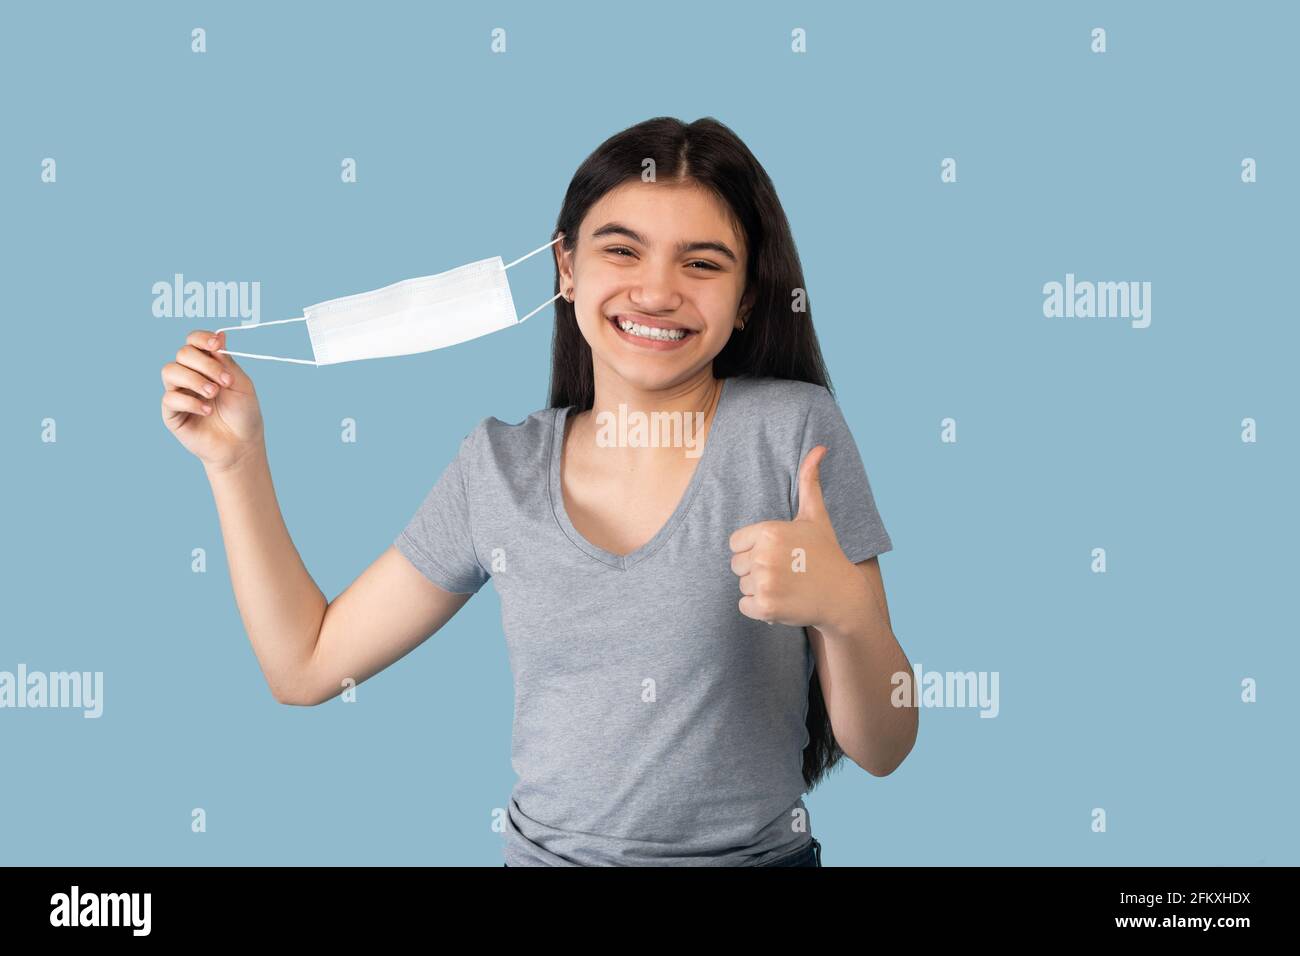 Coronavirus is over. Happy Indian teenage girl taking off her face mask and showing thumb up gesture on blue background Stock Photo